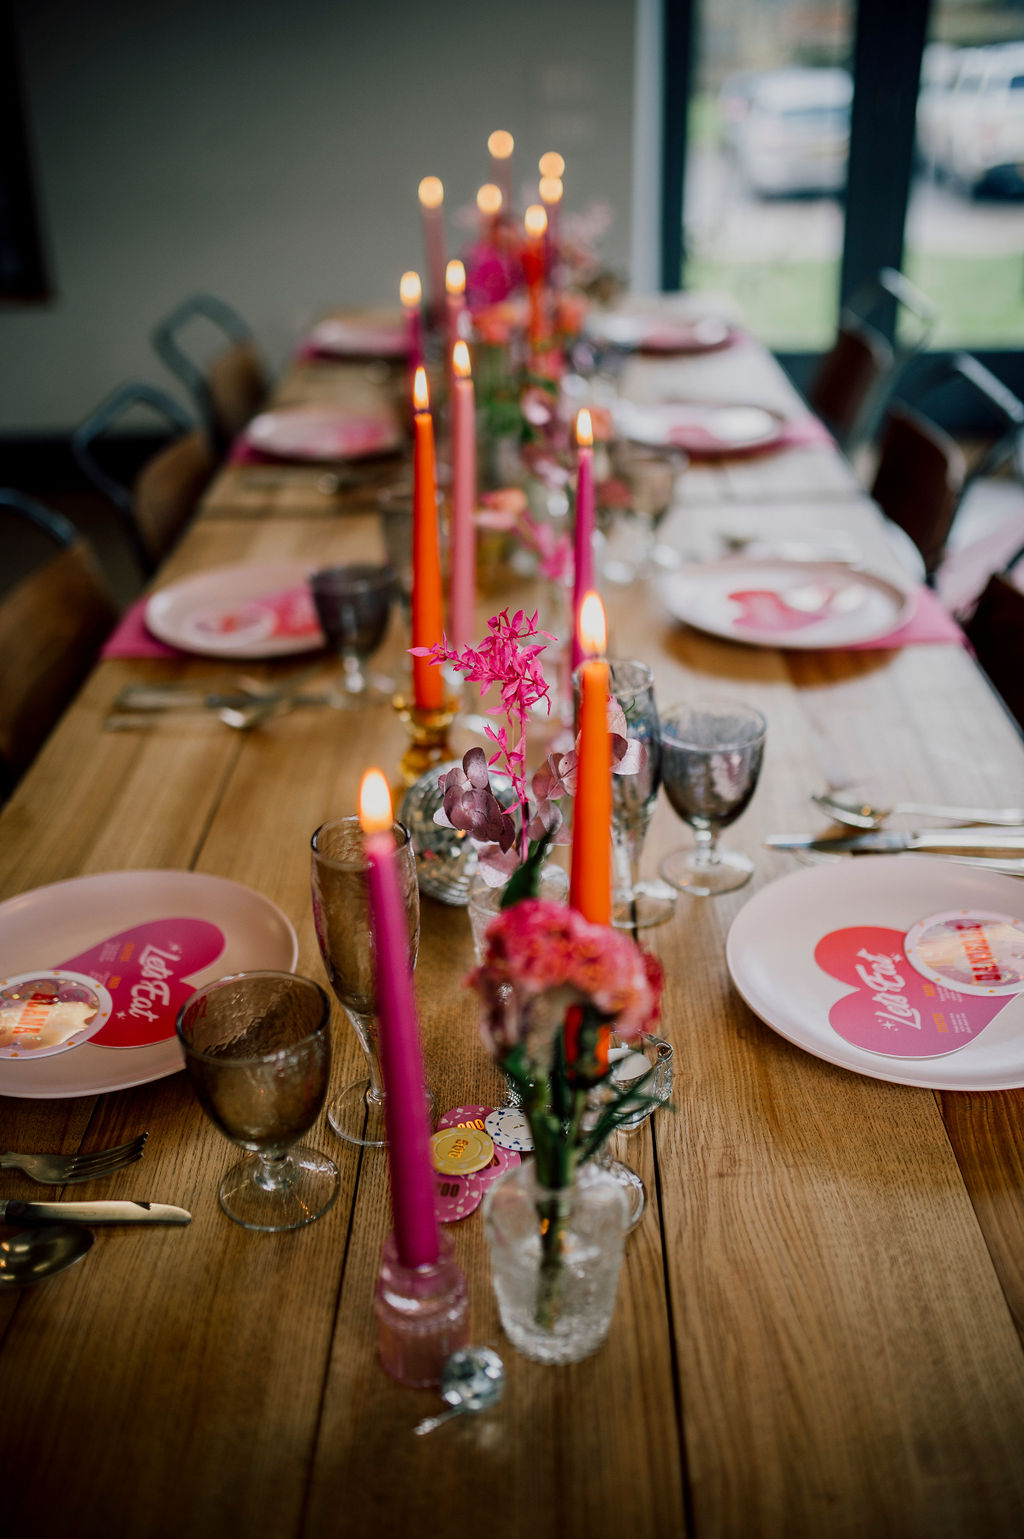 Wedding reception at Achnagairn Castle with black table cloth, rich toned florals and red and pink candles